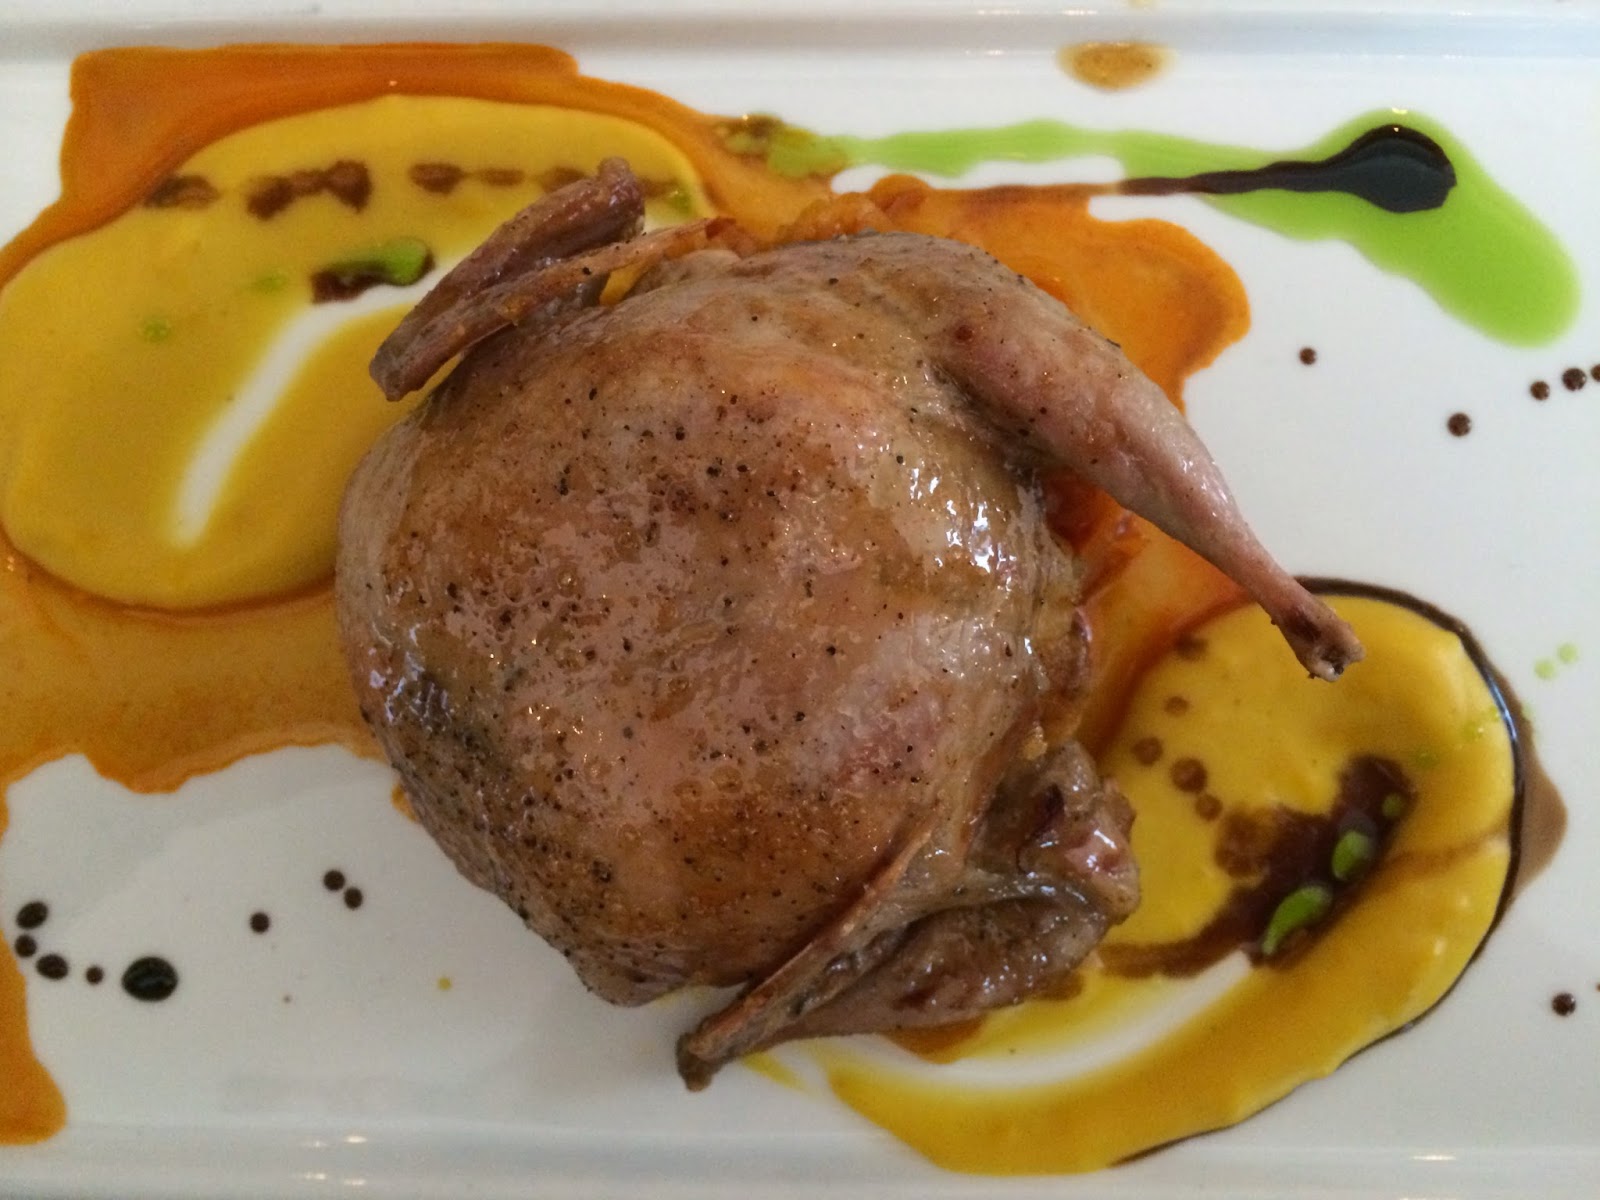 The Oyster Stuffed Quail over Pumpkin Purée at Le Foret in New Orleans